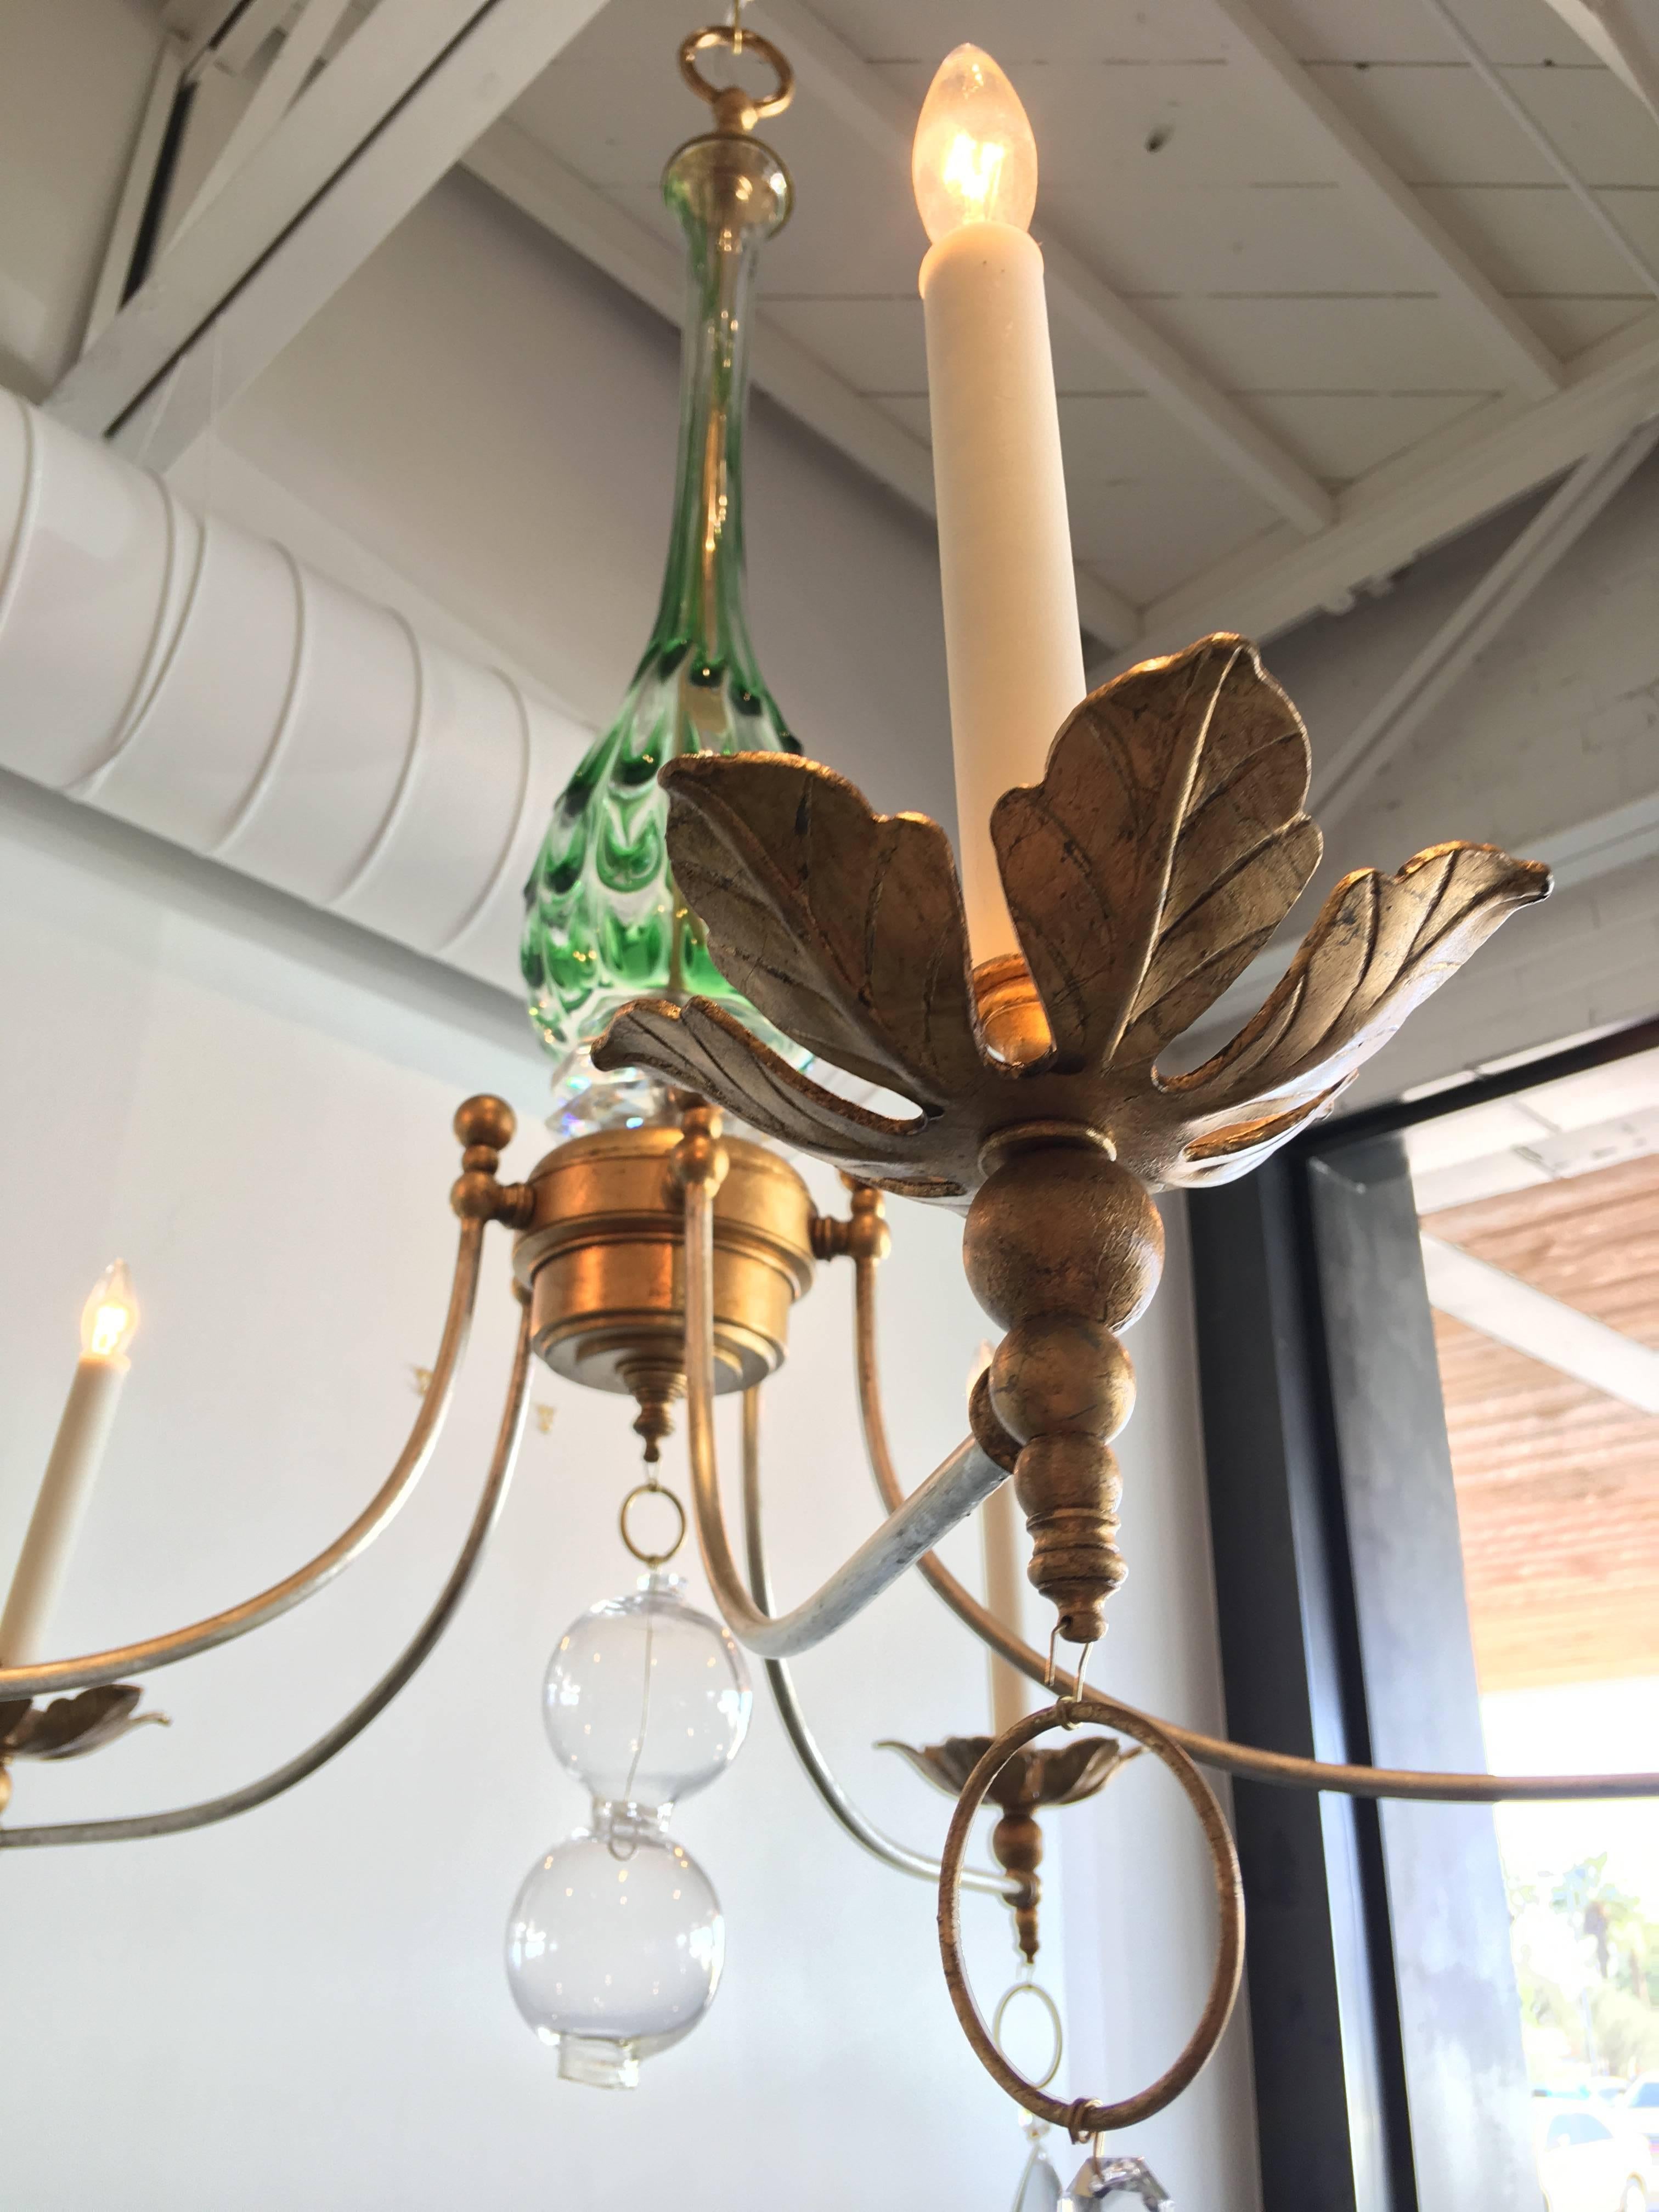 This amazing fixture has been created around a vintage green swirled Murano glass centerpiece. The arms and body are contemporary and new. How fabulous would this be in your home?!